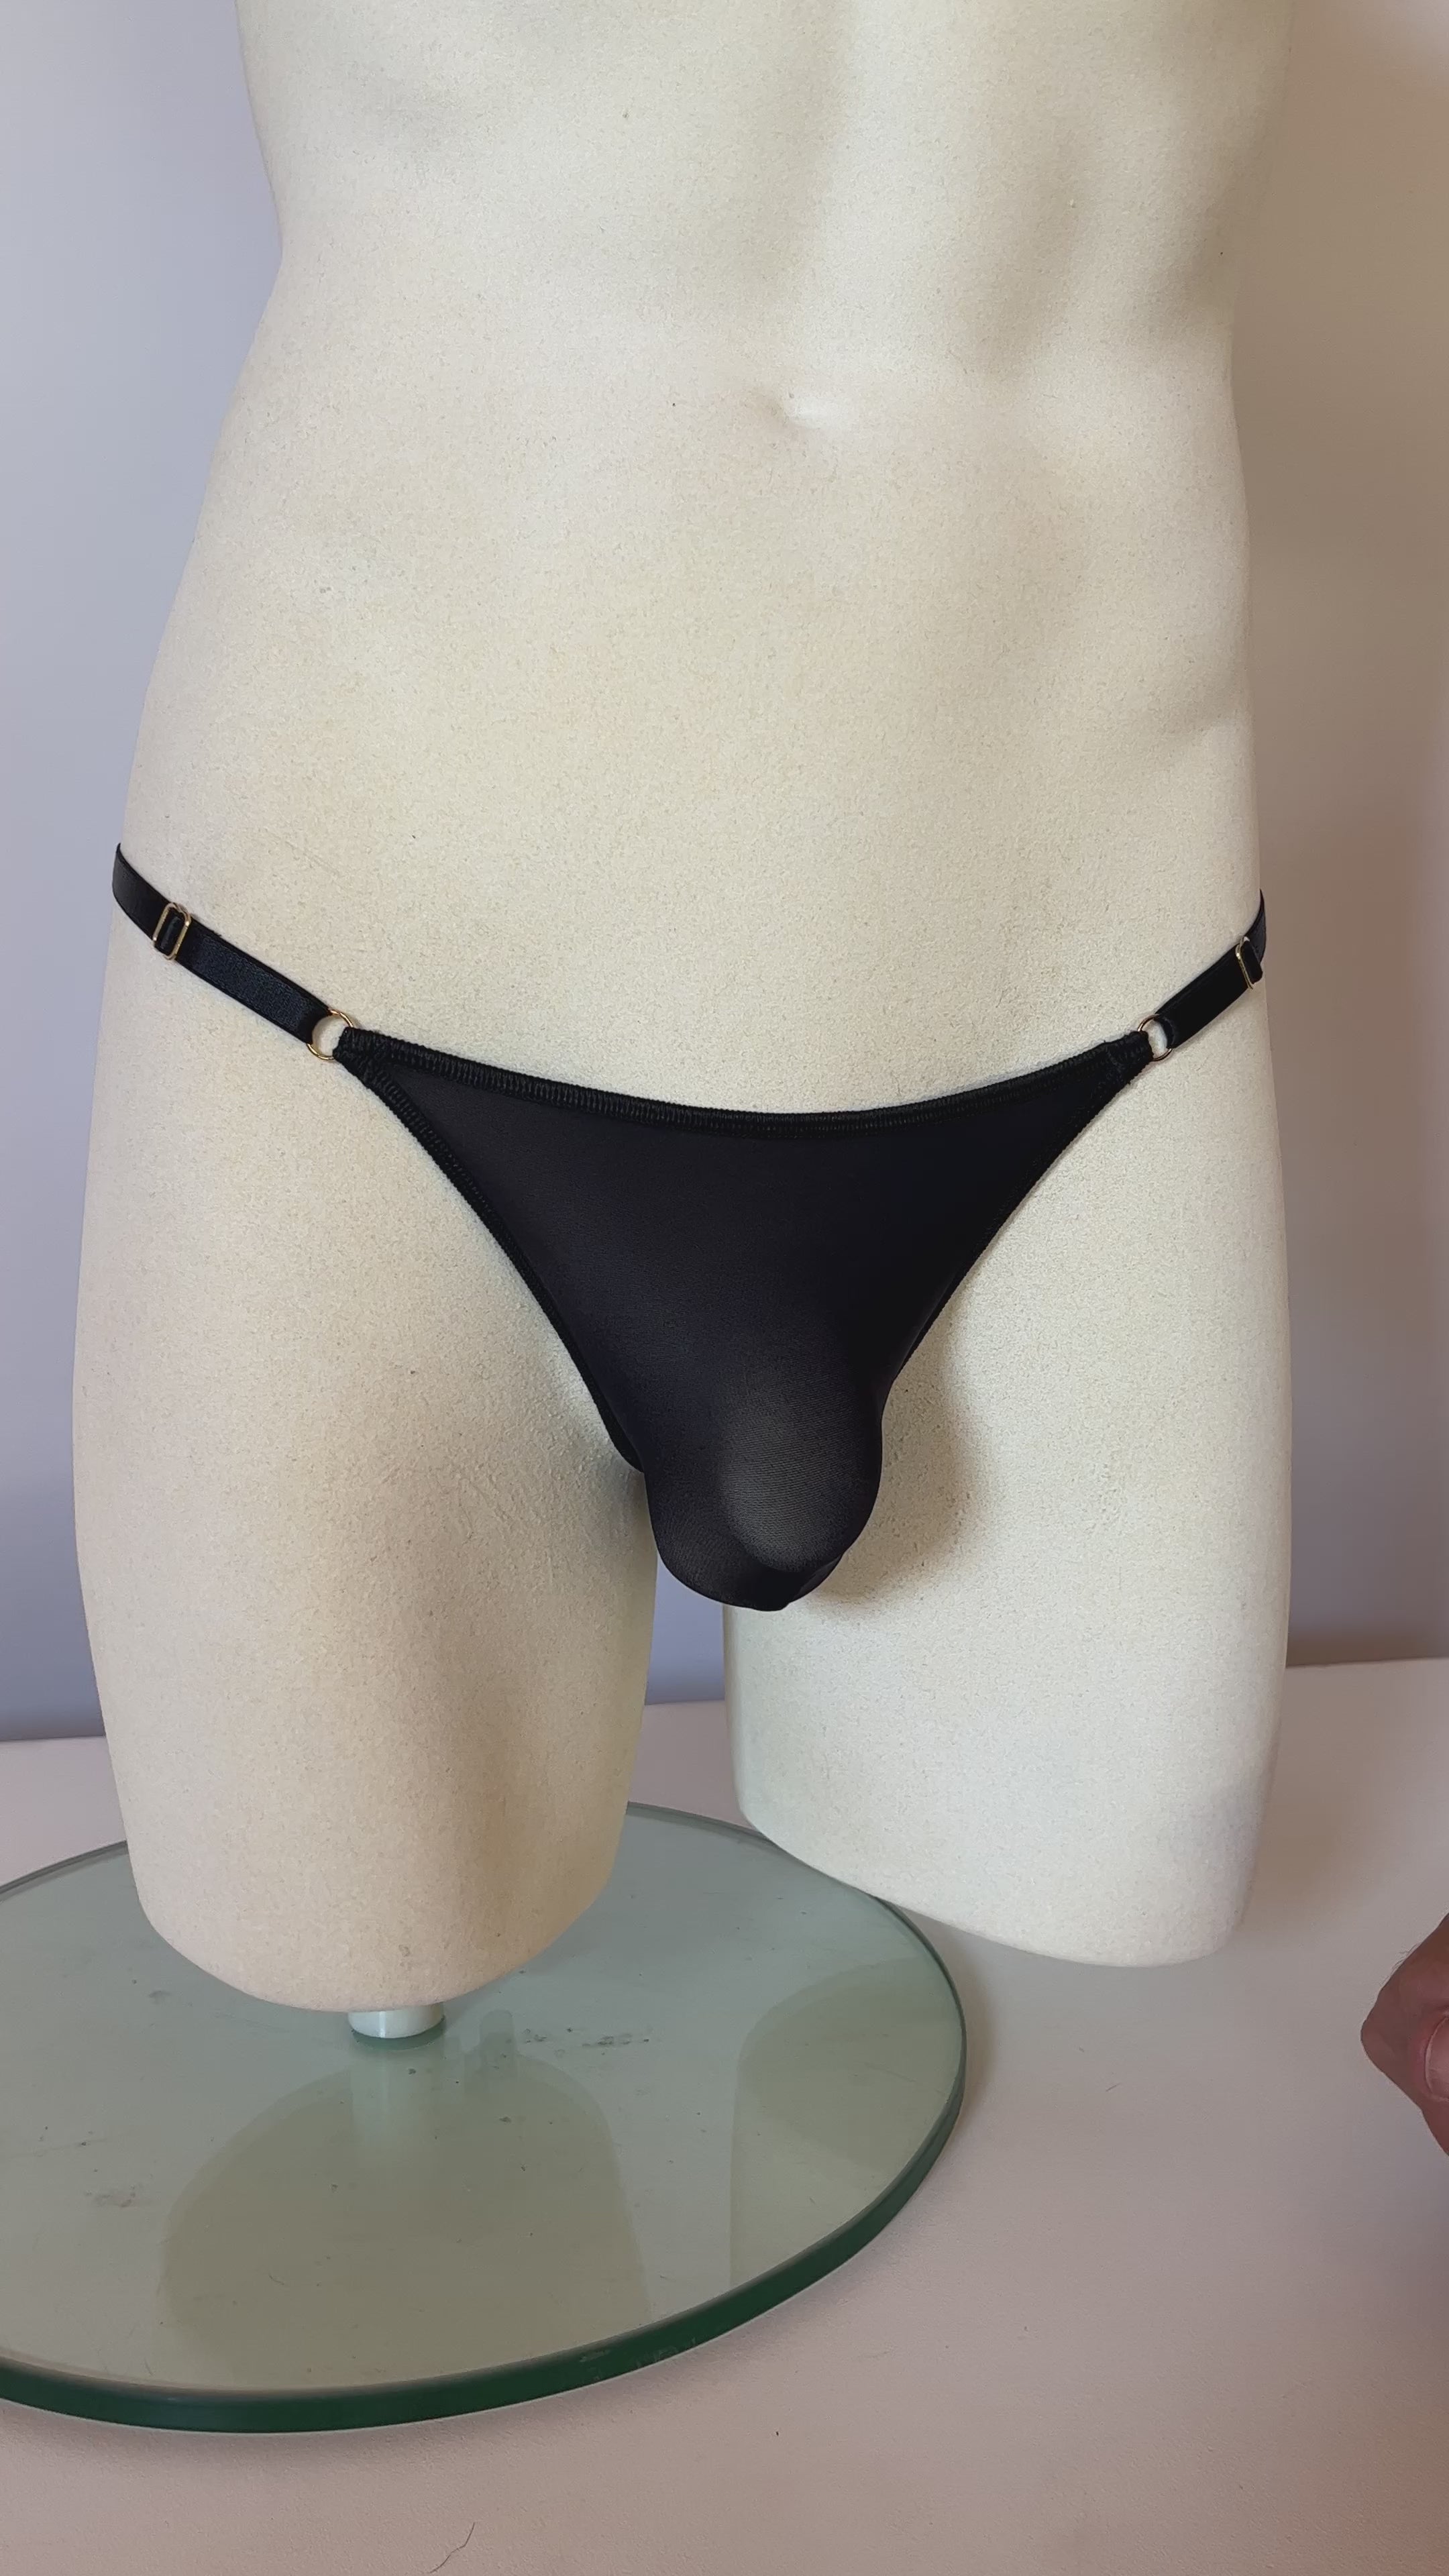 Mannequin showing the mesh tanga knickers for men, lingerie for men, mens lingerie, sexy knickers, sexy black panties for him, can men wear lingerie?, sexy underwear for men, best panties for men, men's cute panties, soft black panties for him, strappy black sexy panties for men, trans panties, trans friendly lingerie